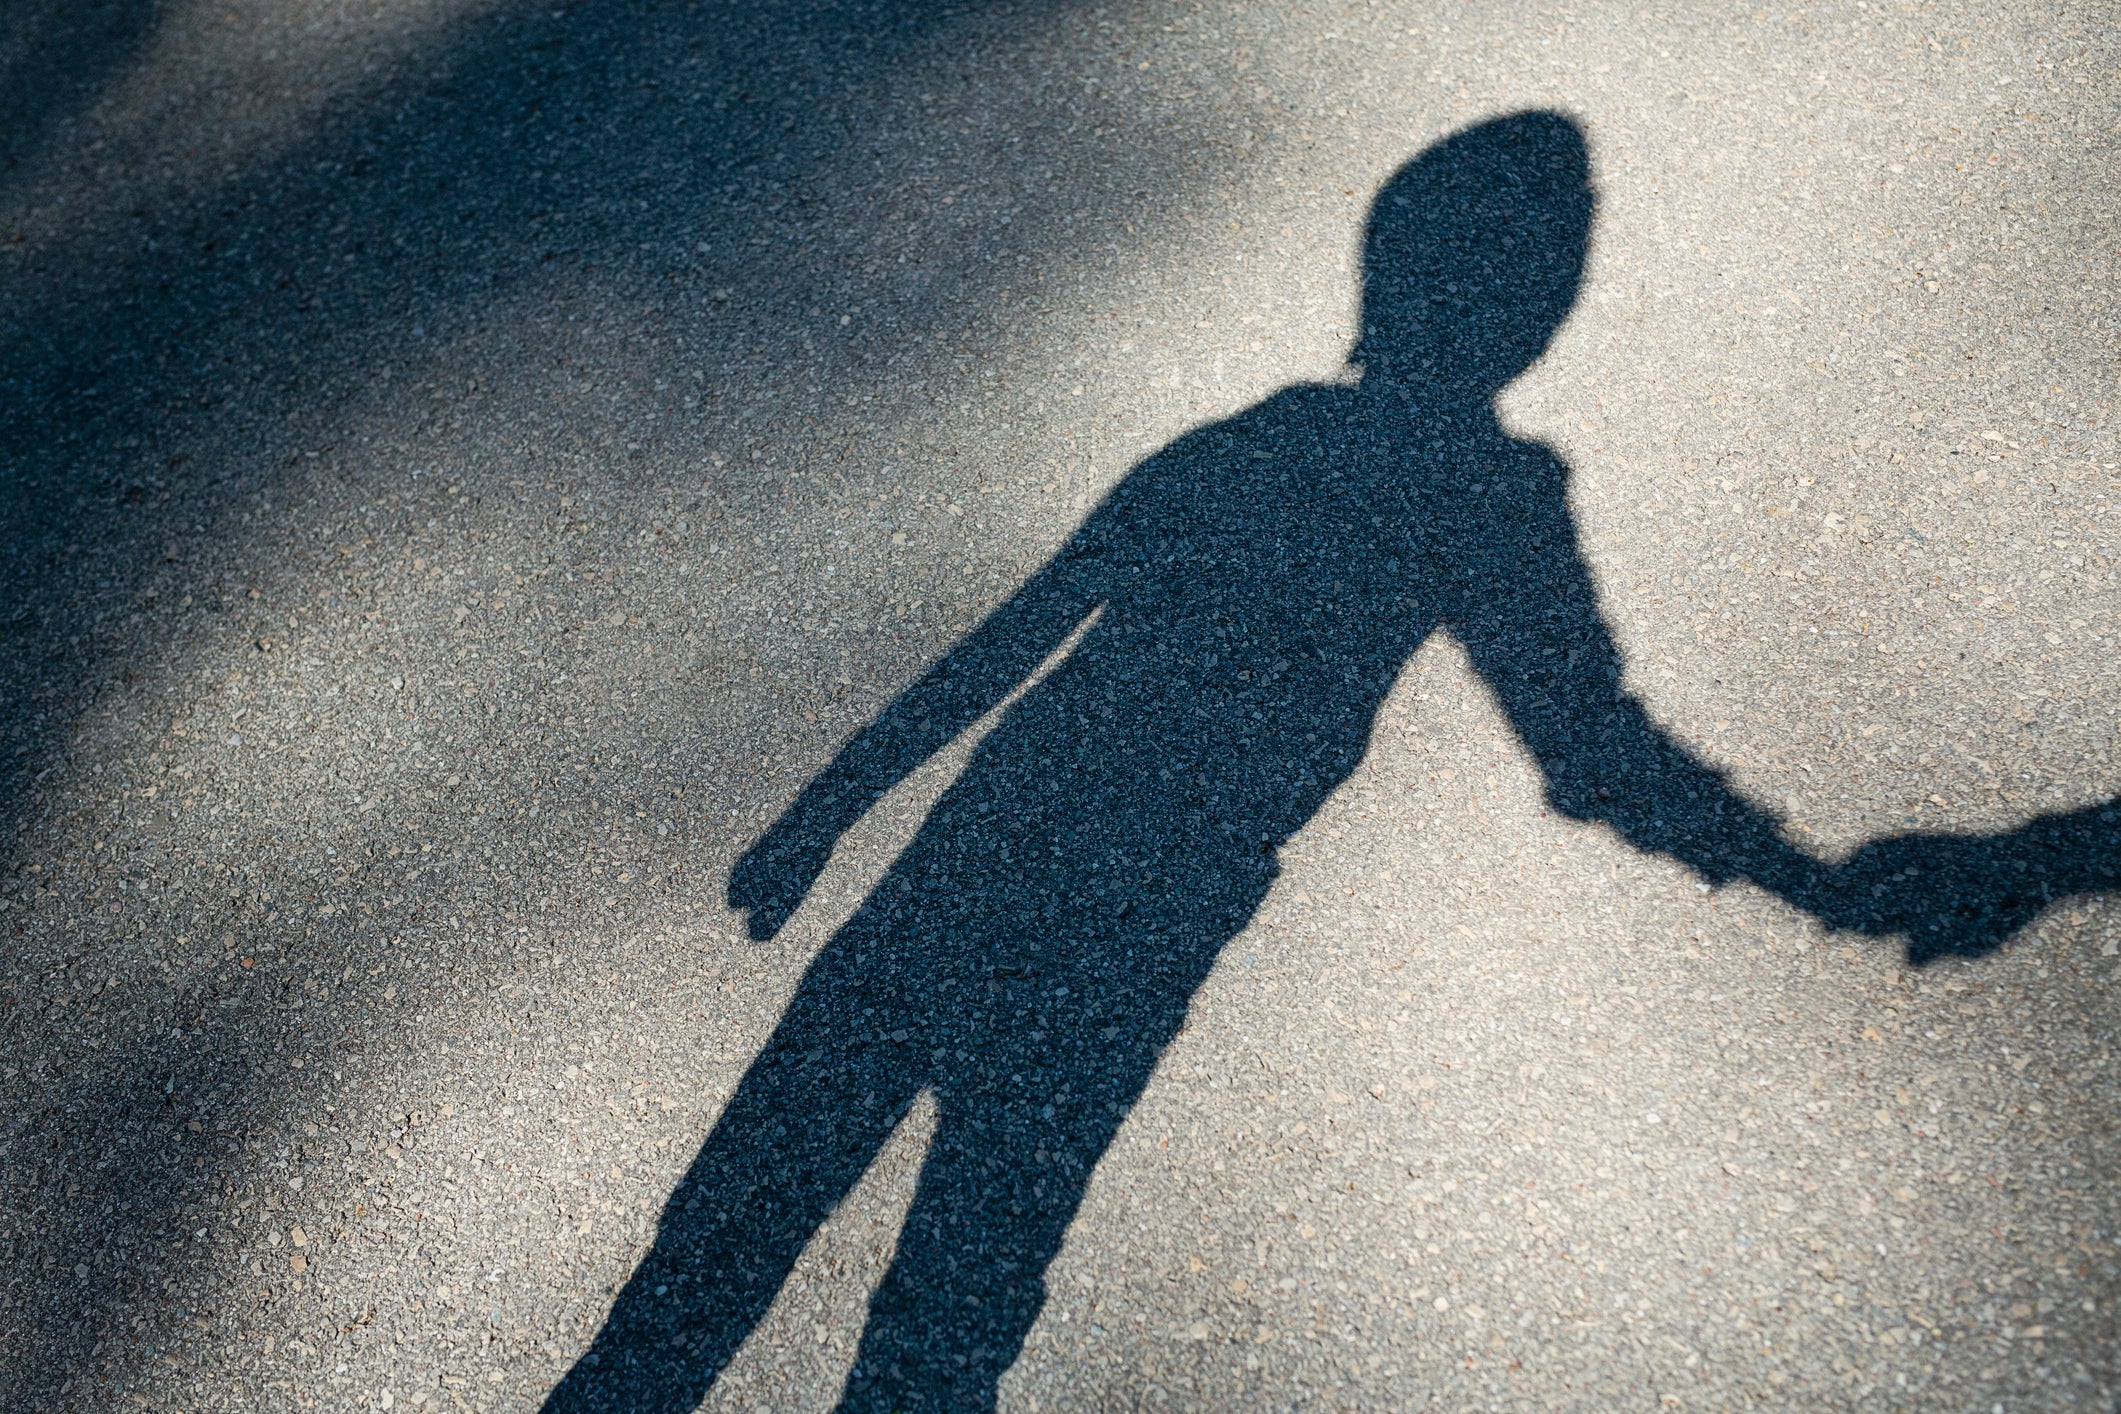 “She’s Our Hero”: Black 6-Year-Old Girl Bit Man Trying To Kidnap Her